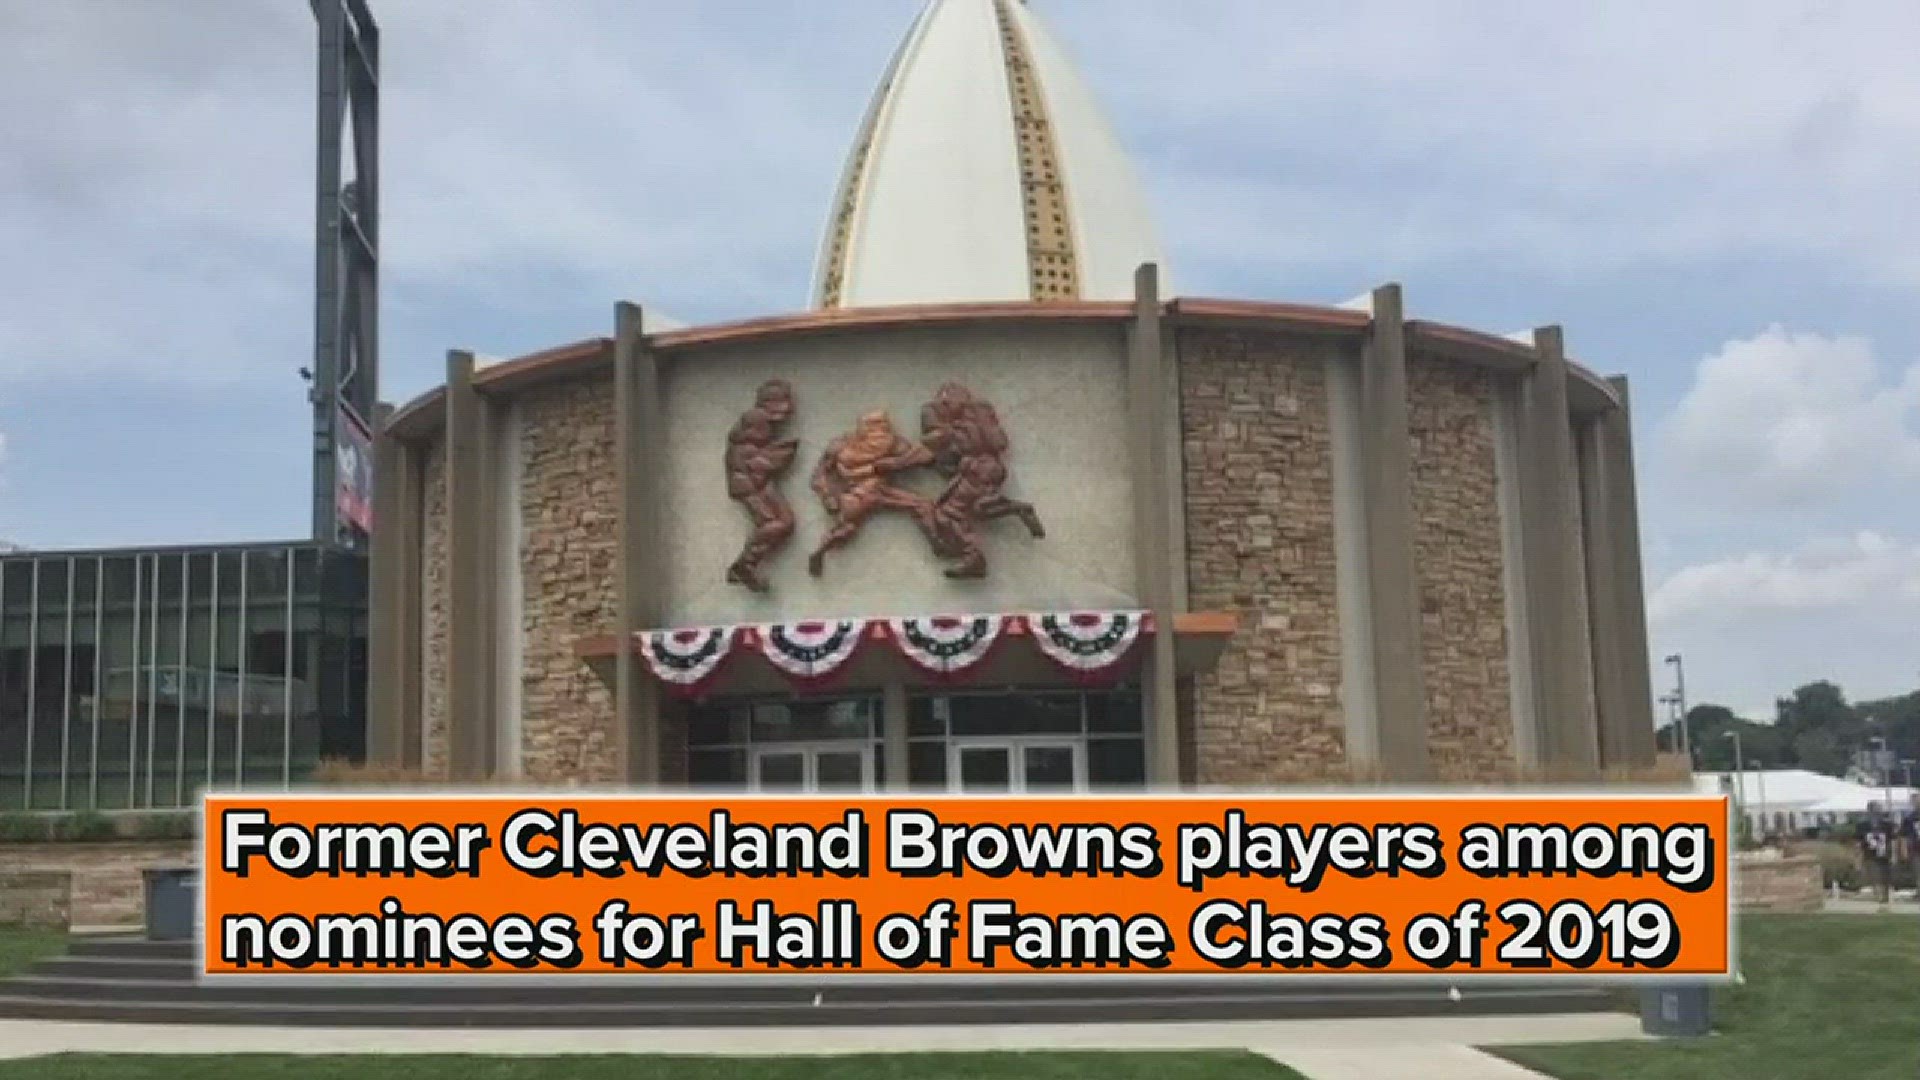 Former Cleveland Browns Clay Matthews, Eric Metcalf among nominees for Hall of Fame Class of 2019